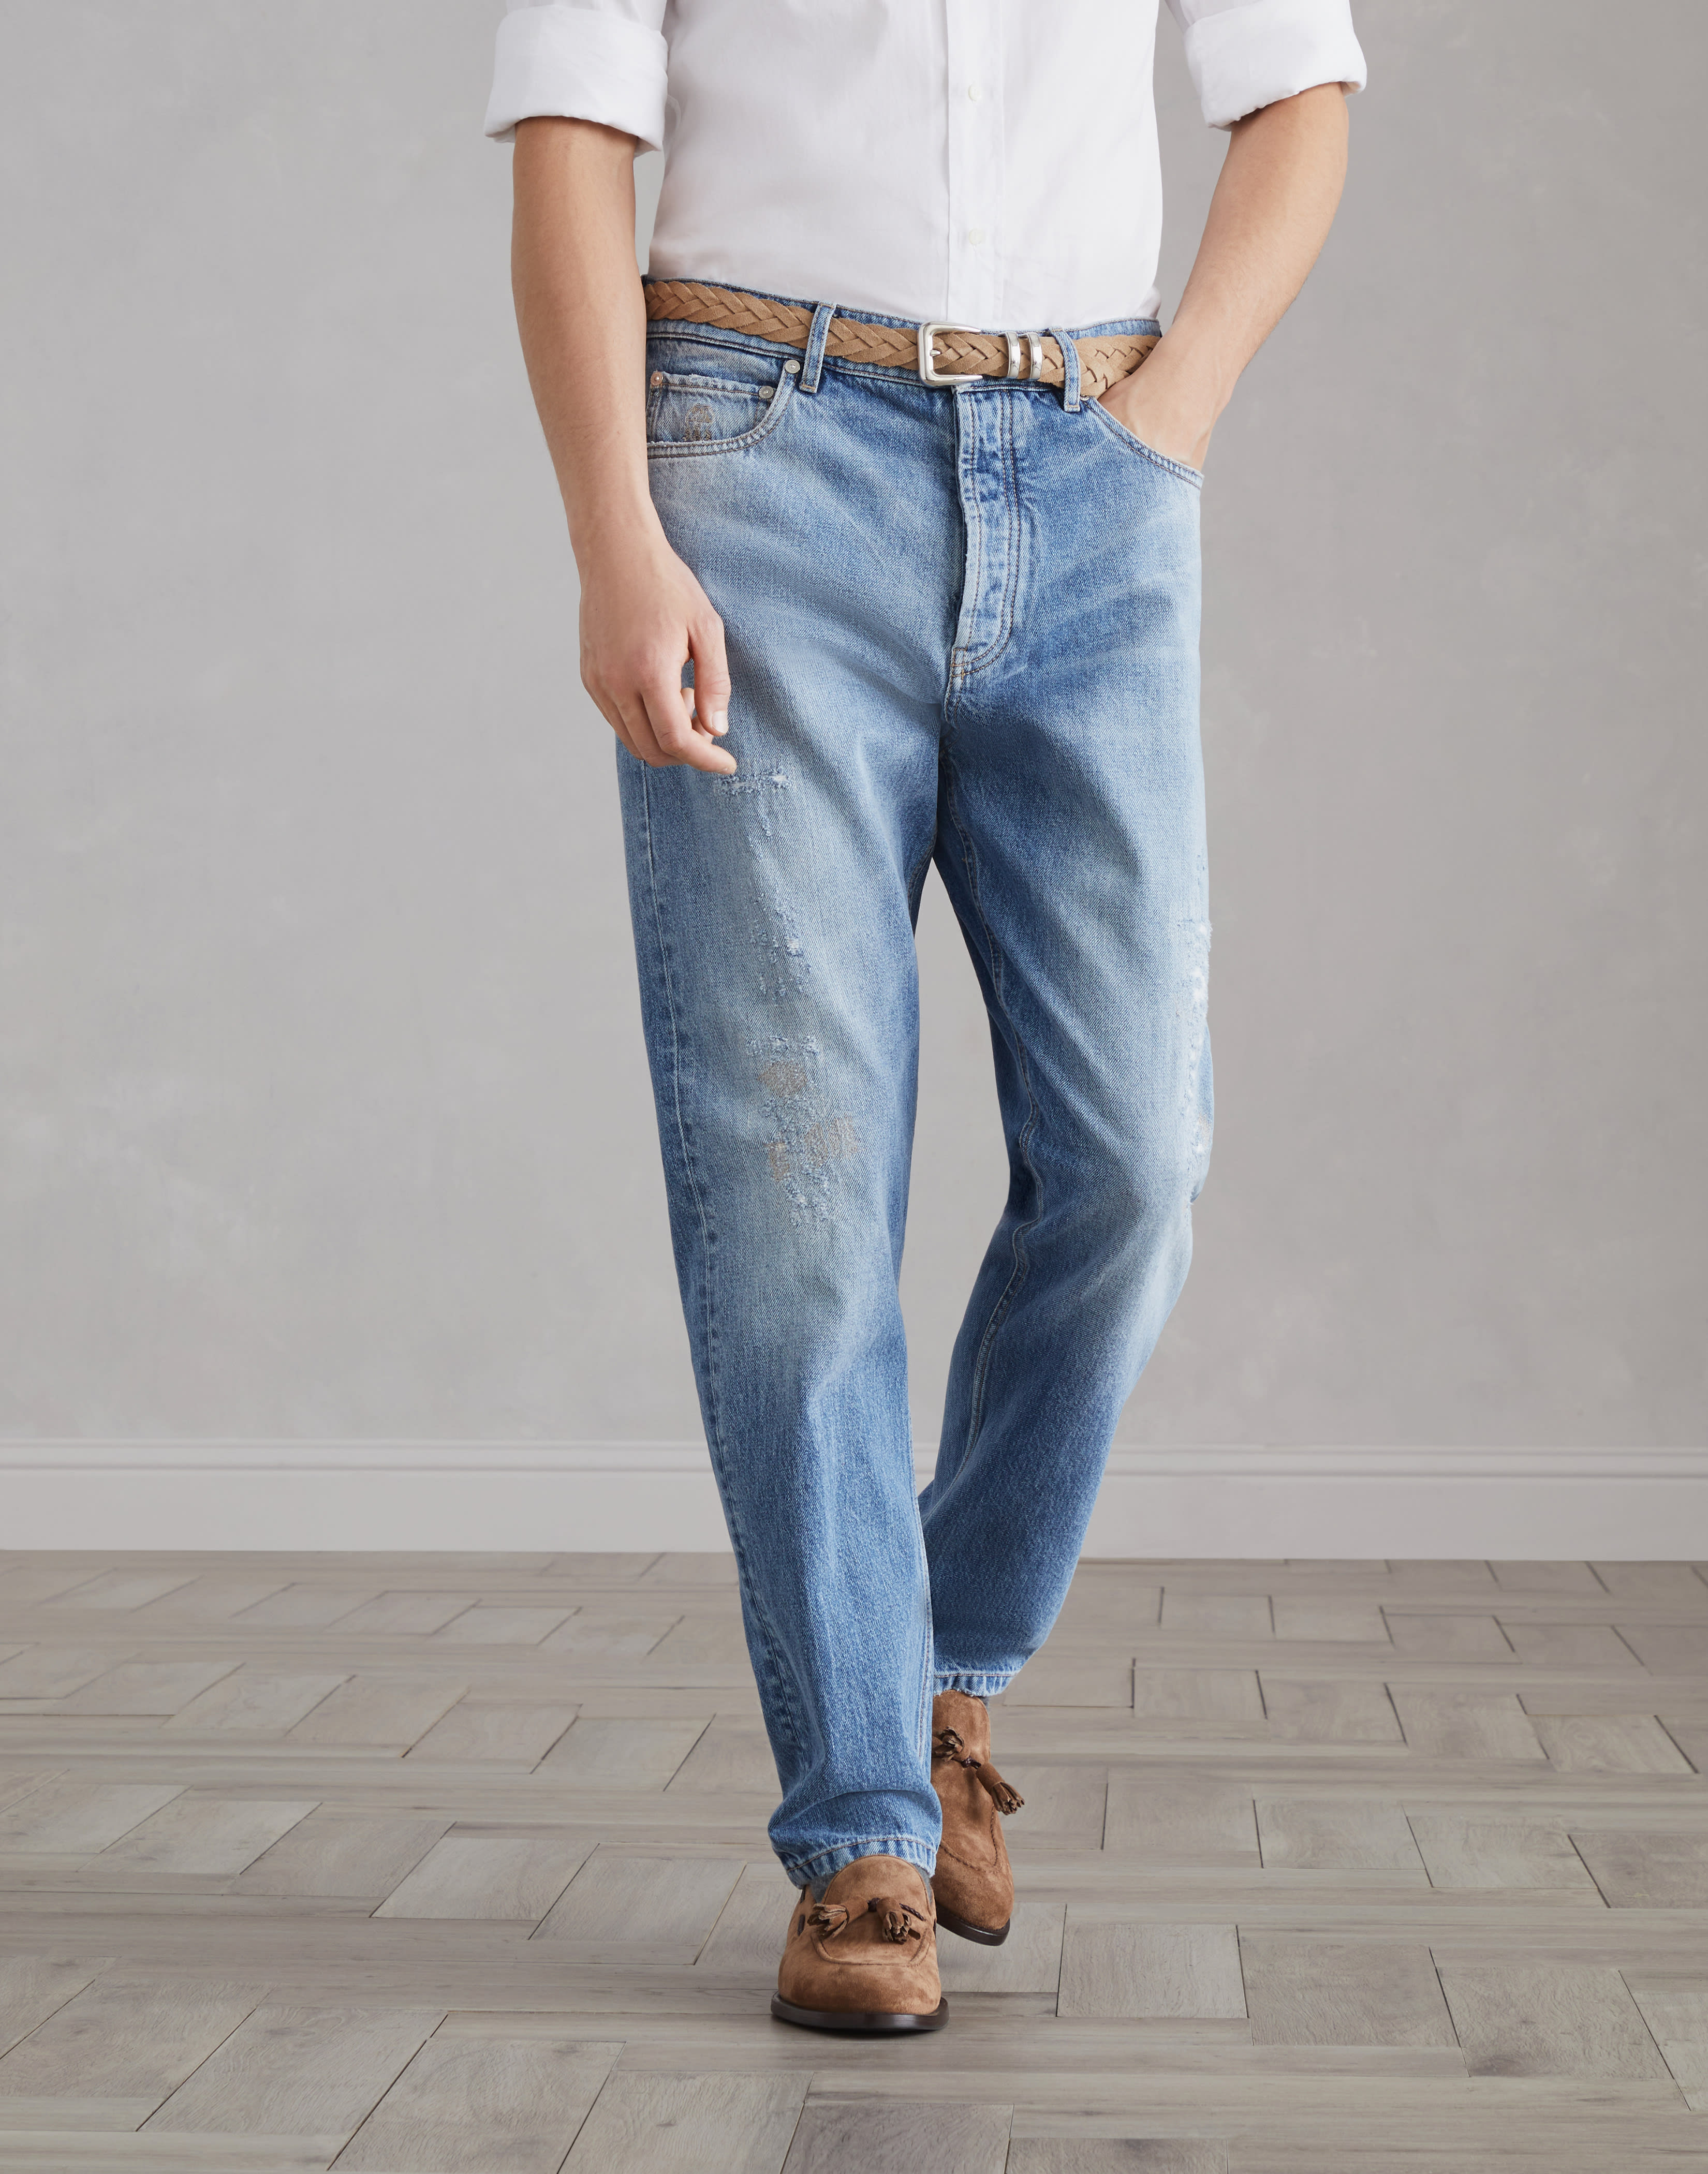 Denim Trousers with Rips - Front view